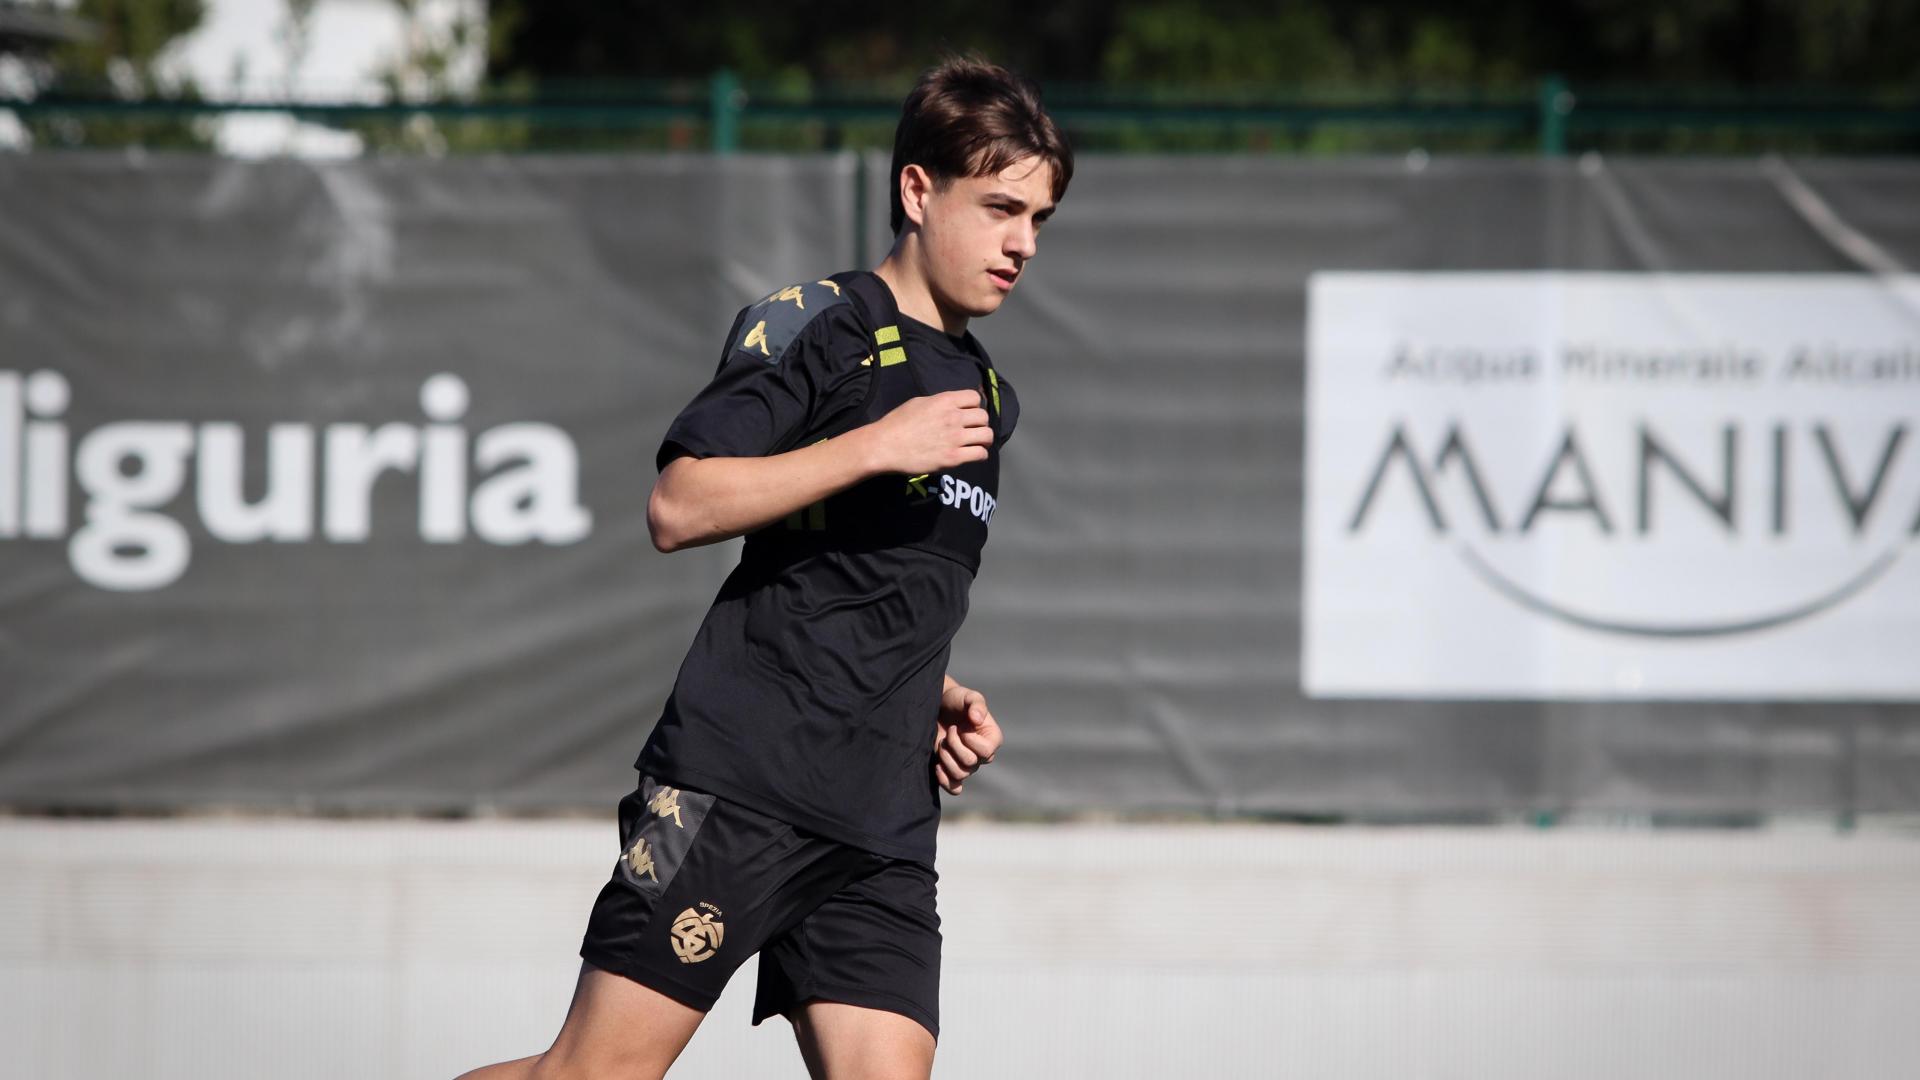 Under 16: new call to the national team for Alessio Insignito